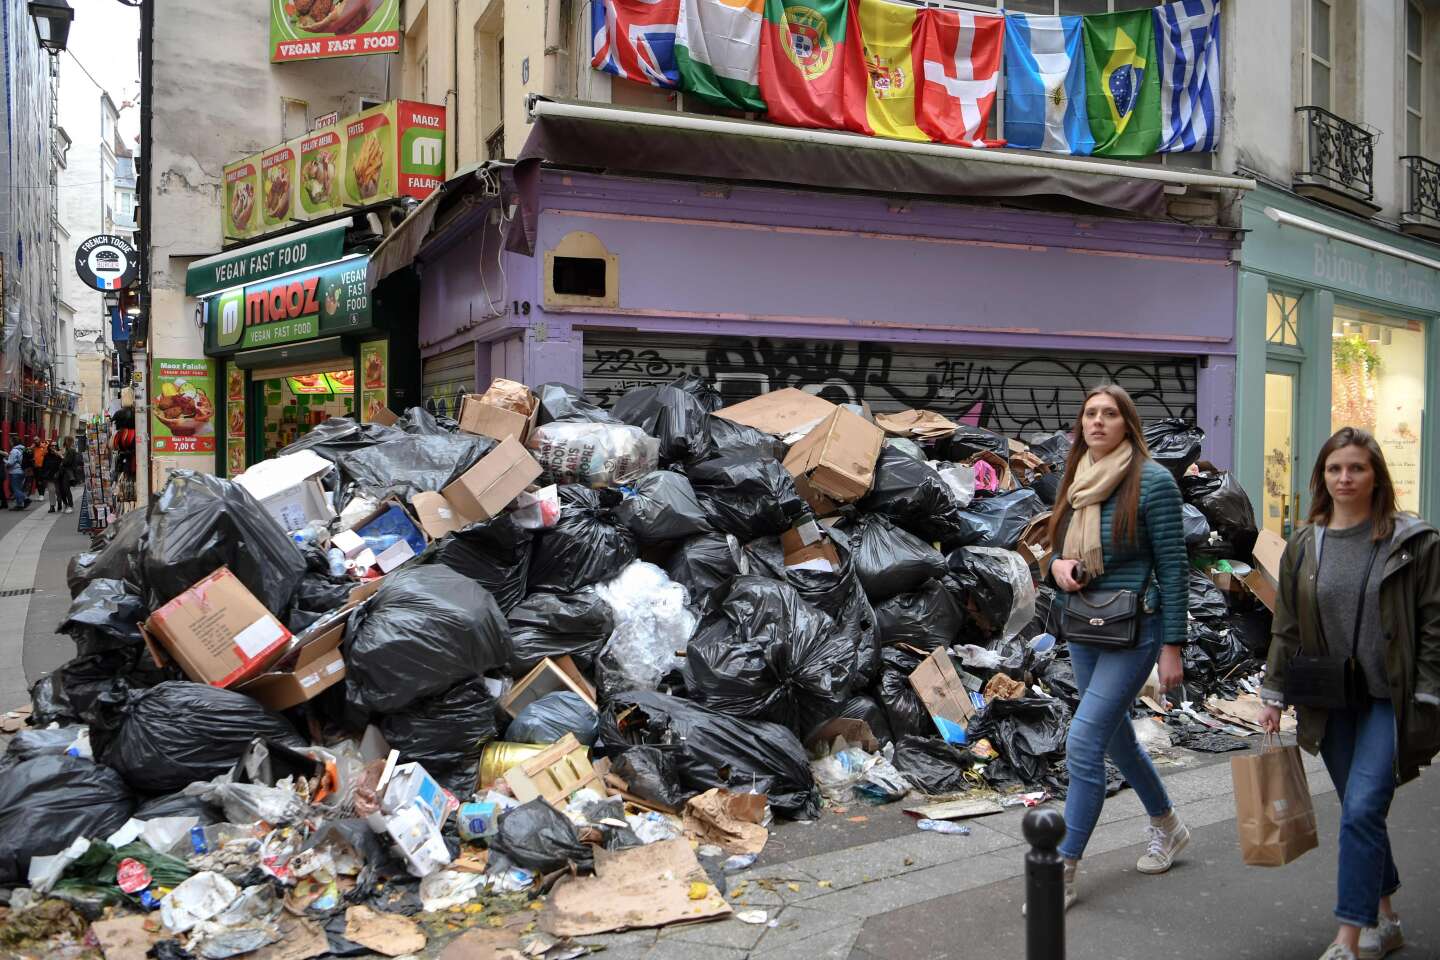 in Paris, 10,000 tonnes of uncollected waste and a confused situation